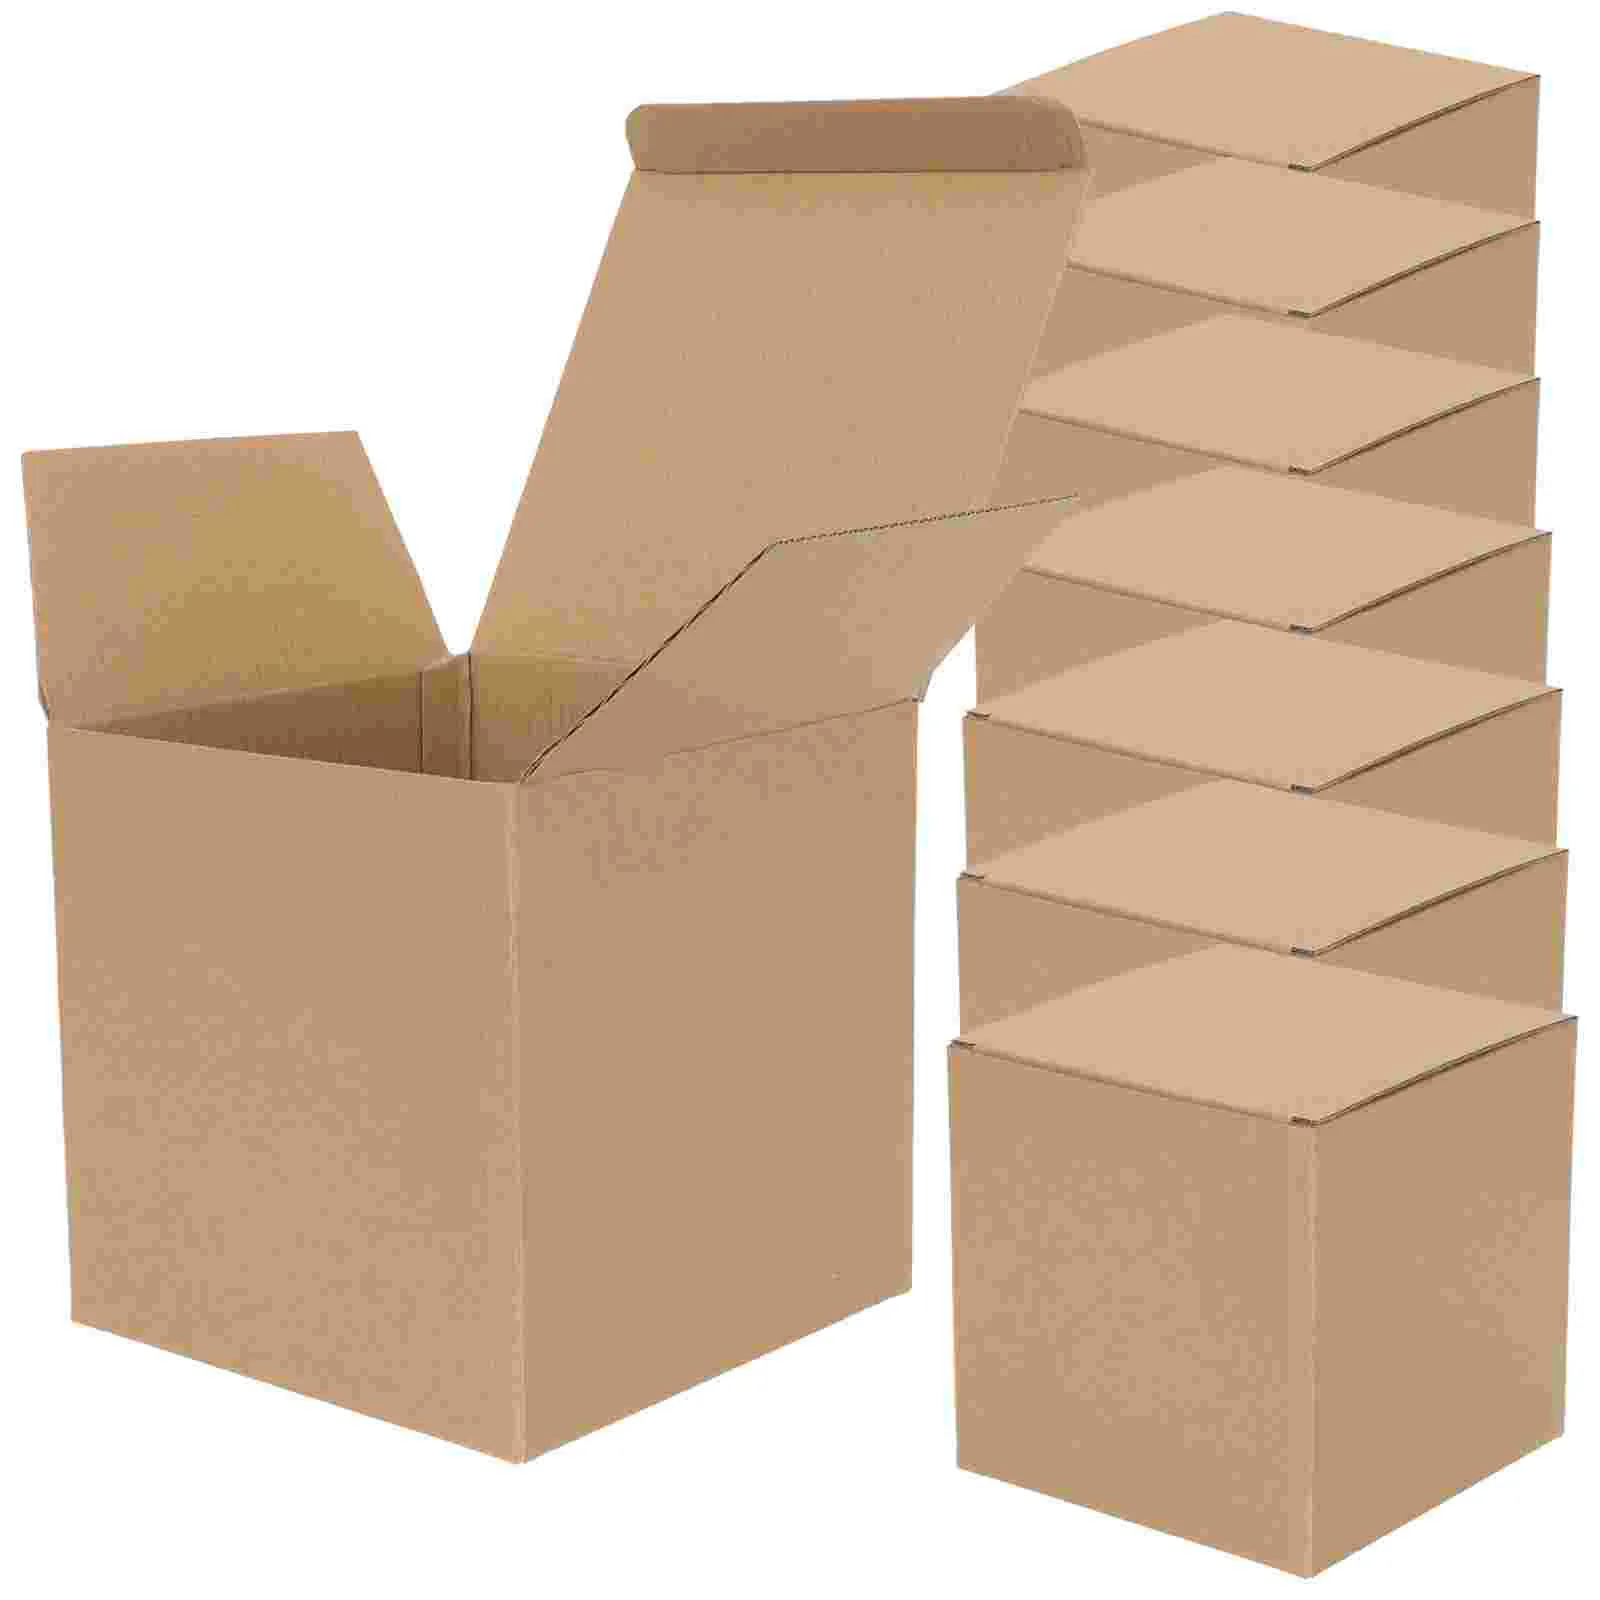 

Boxes Box Shipping Cardboard Corrugated Packaging Gift Business Packing Mini Mailer Paper Large Mailing 6X6X6 Carton Kraft